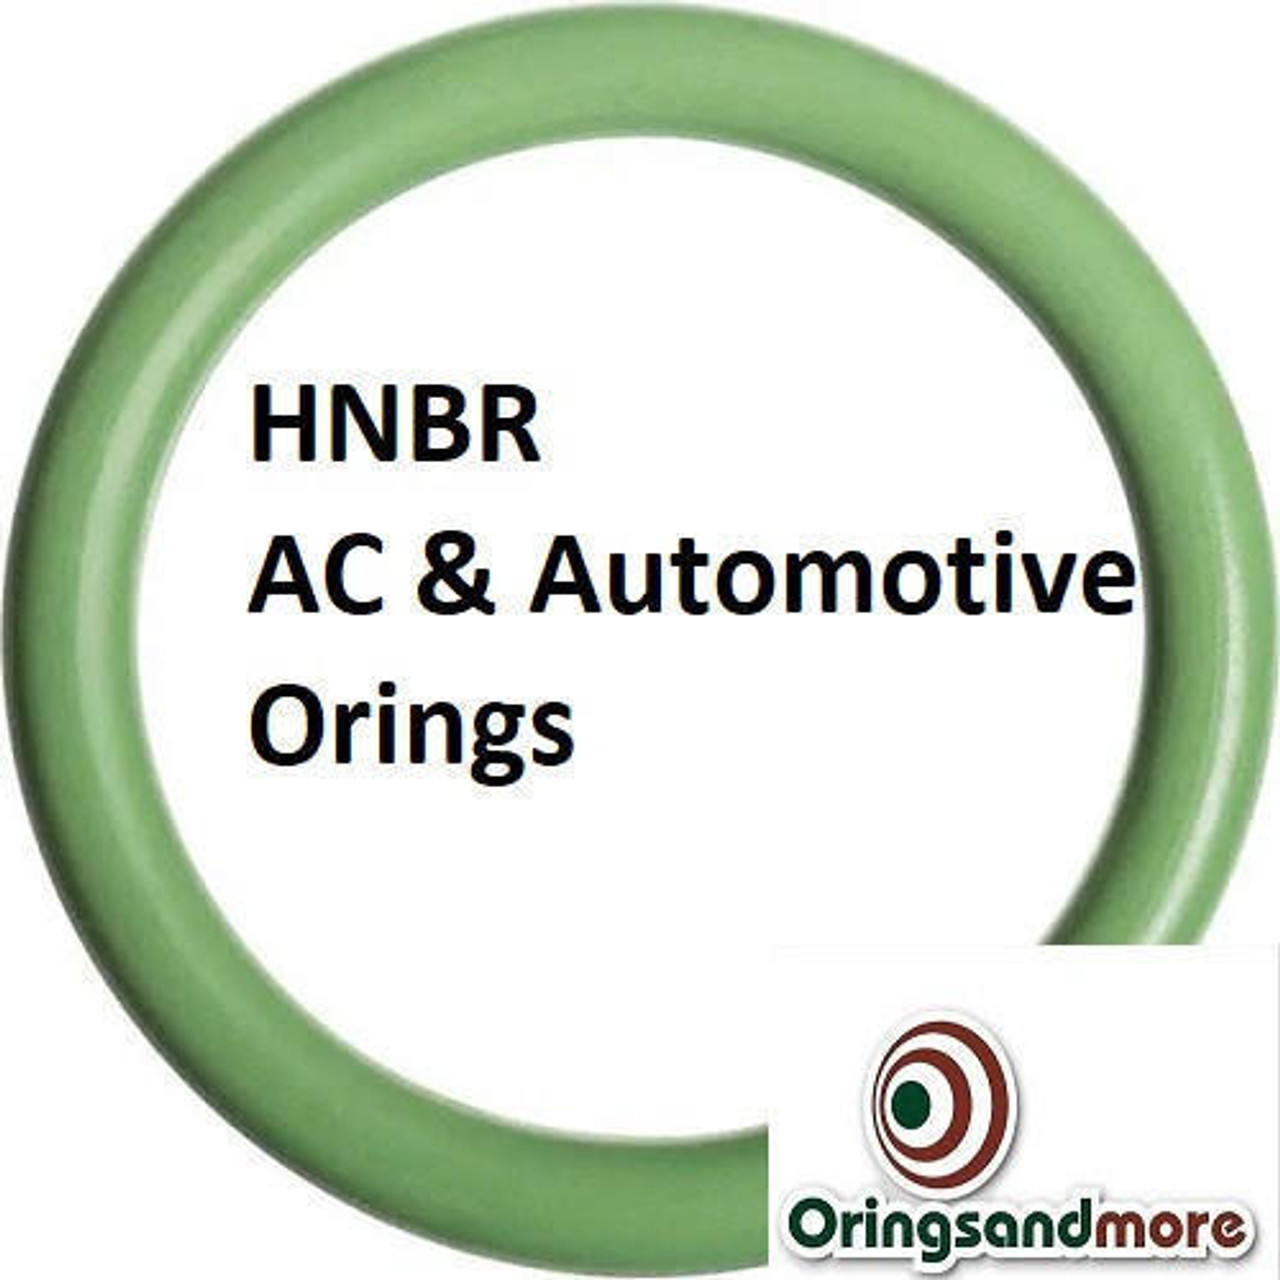 HNBR Orings  # 166-70D Green Price for 1 pc